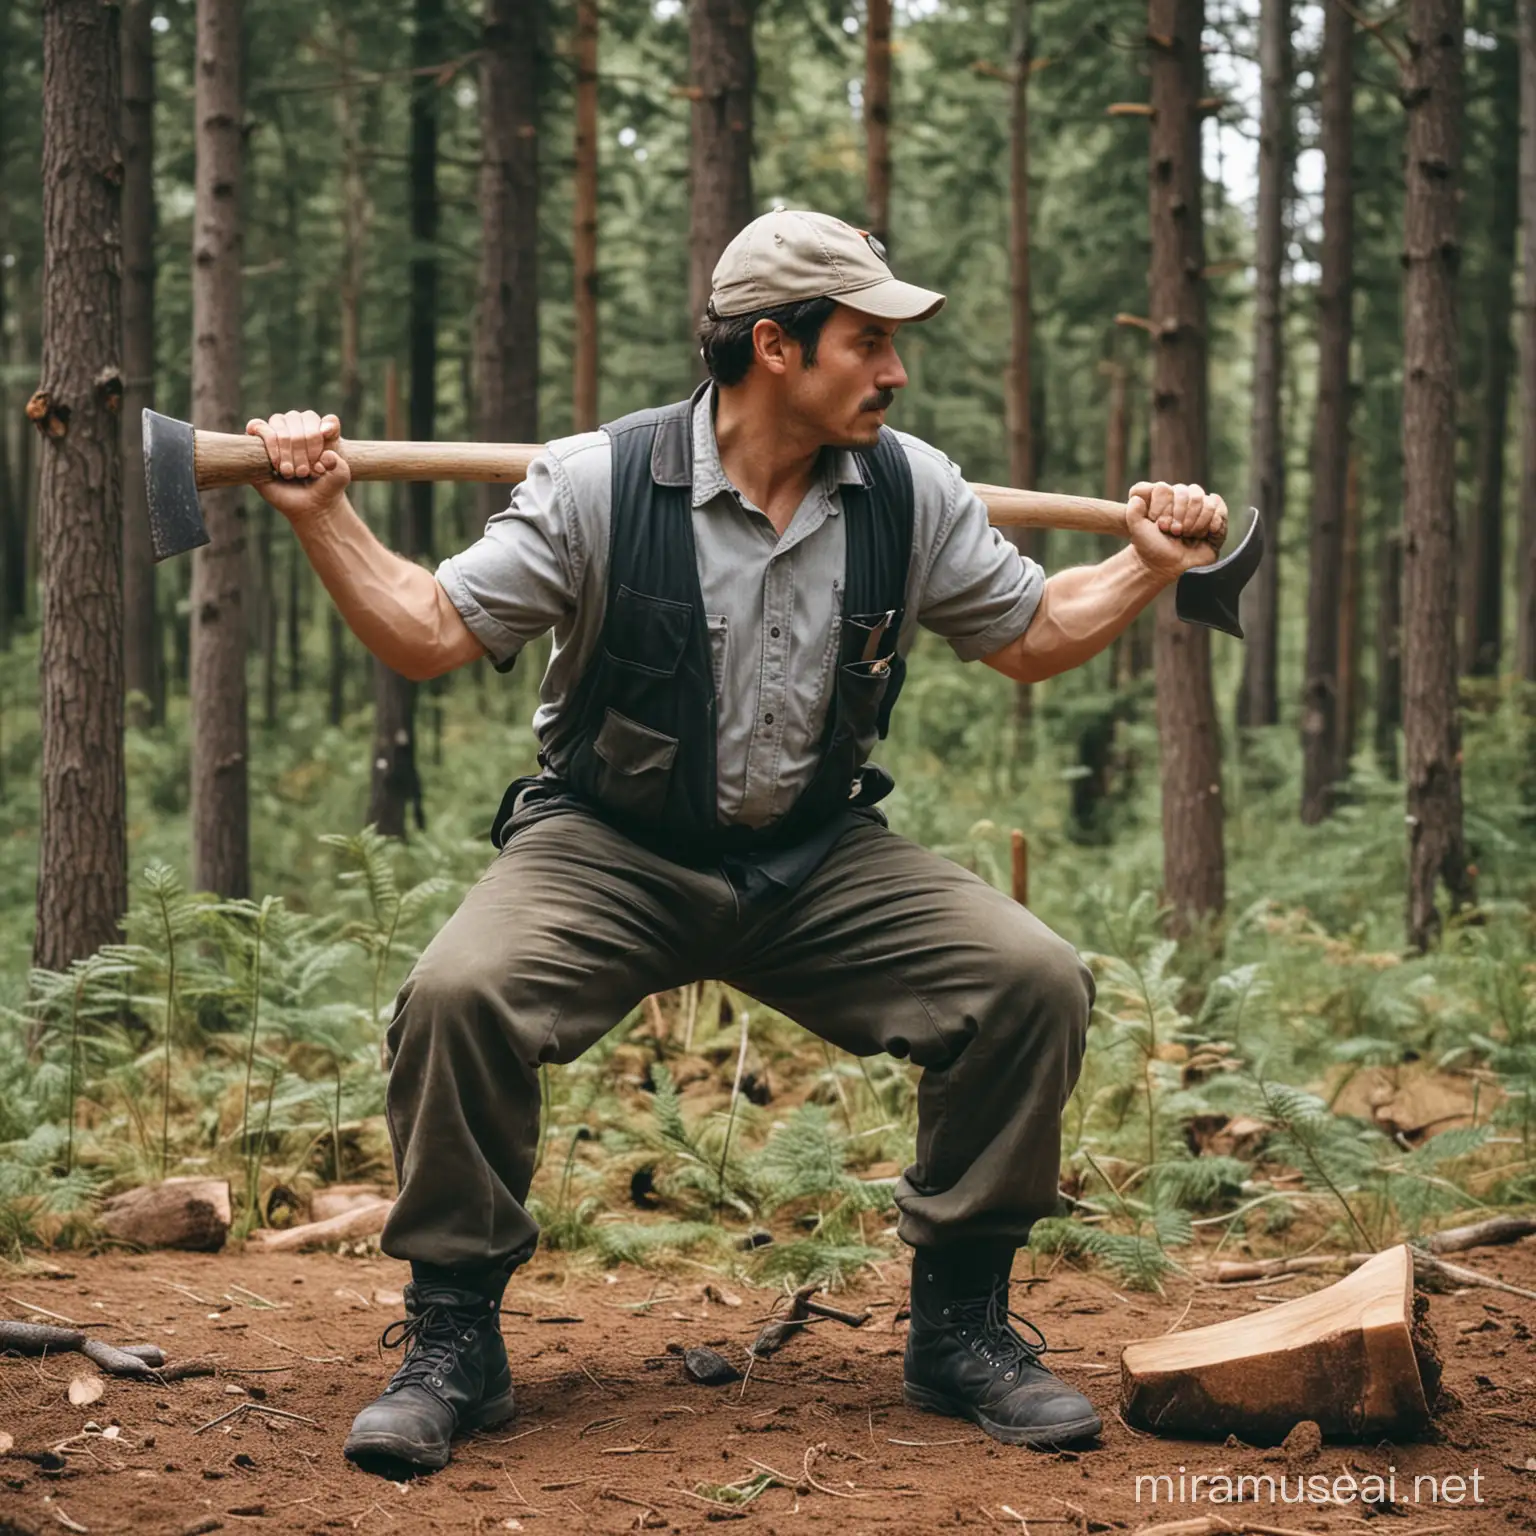 A forest worker with this posture: sitting on alog with the back bent forward or twisted sideways, one hand above shoulder level holding an axe.